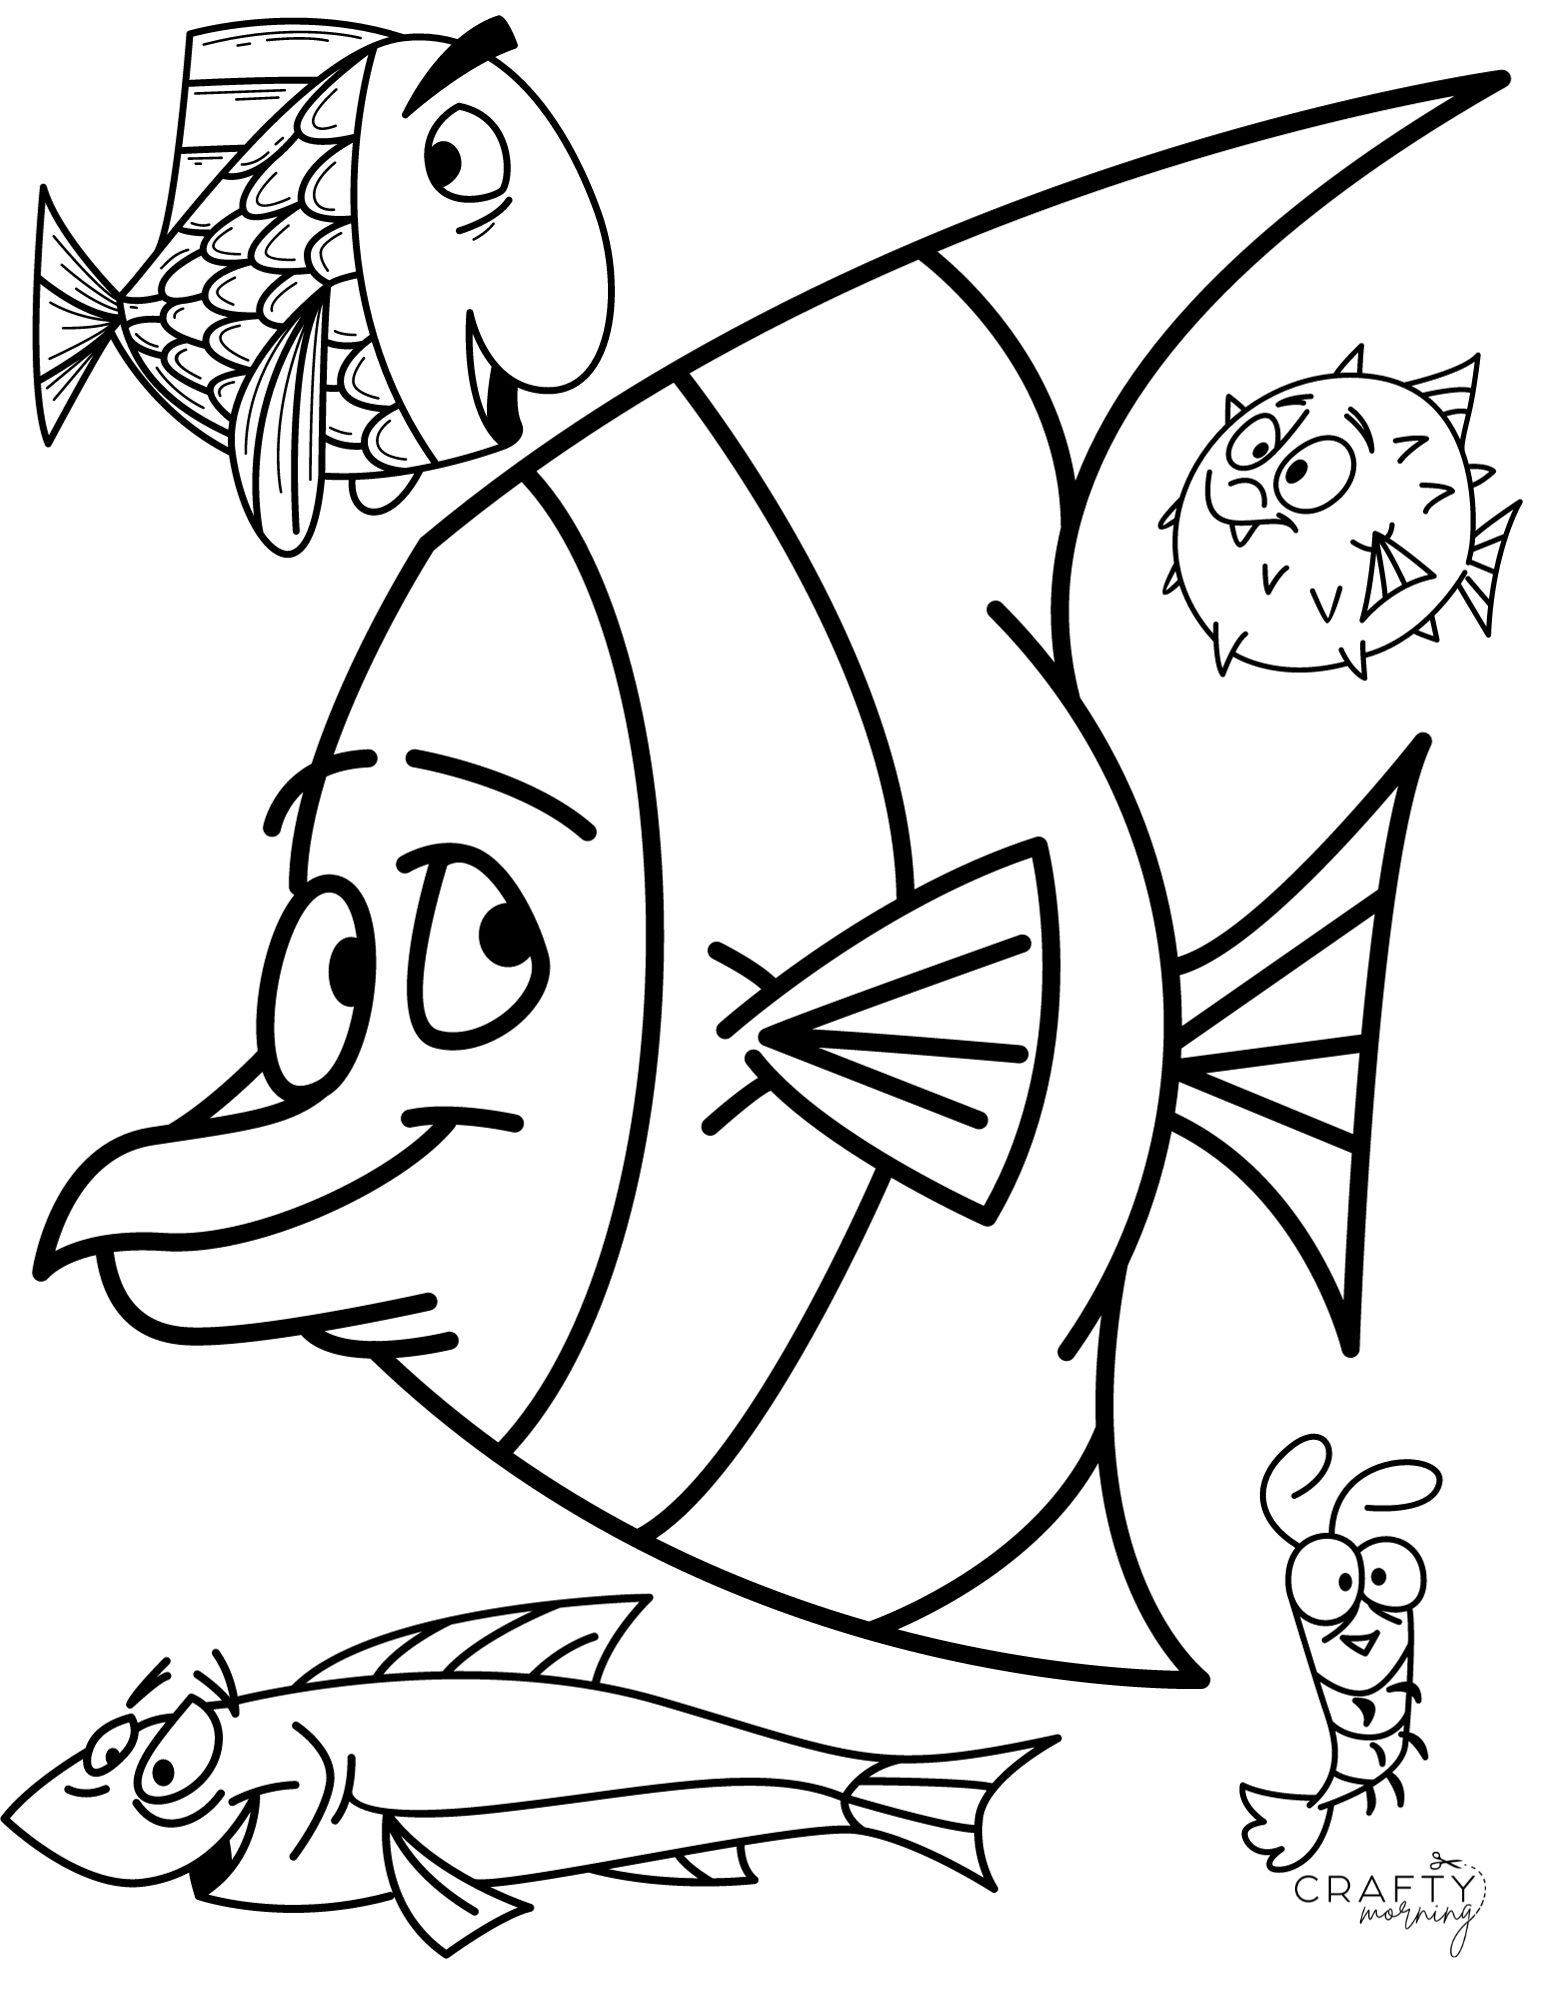 How To Draw Nimo | Finding Nemo - YouTube